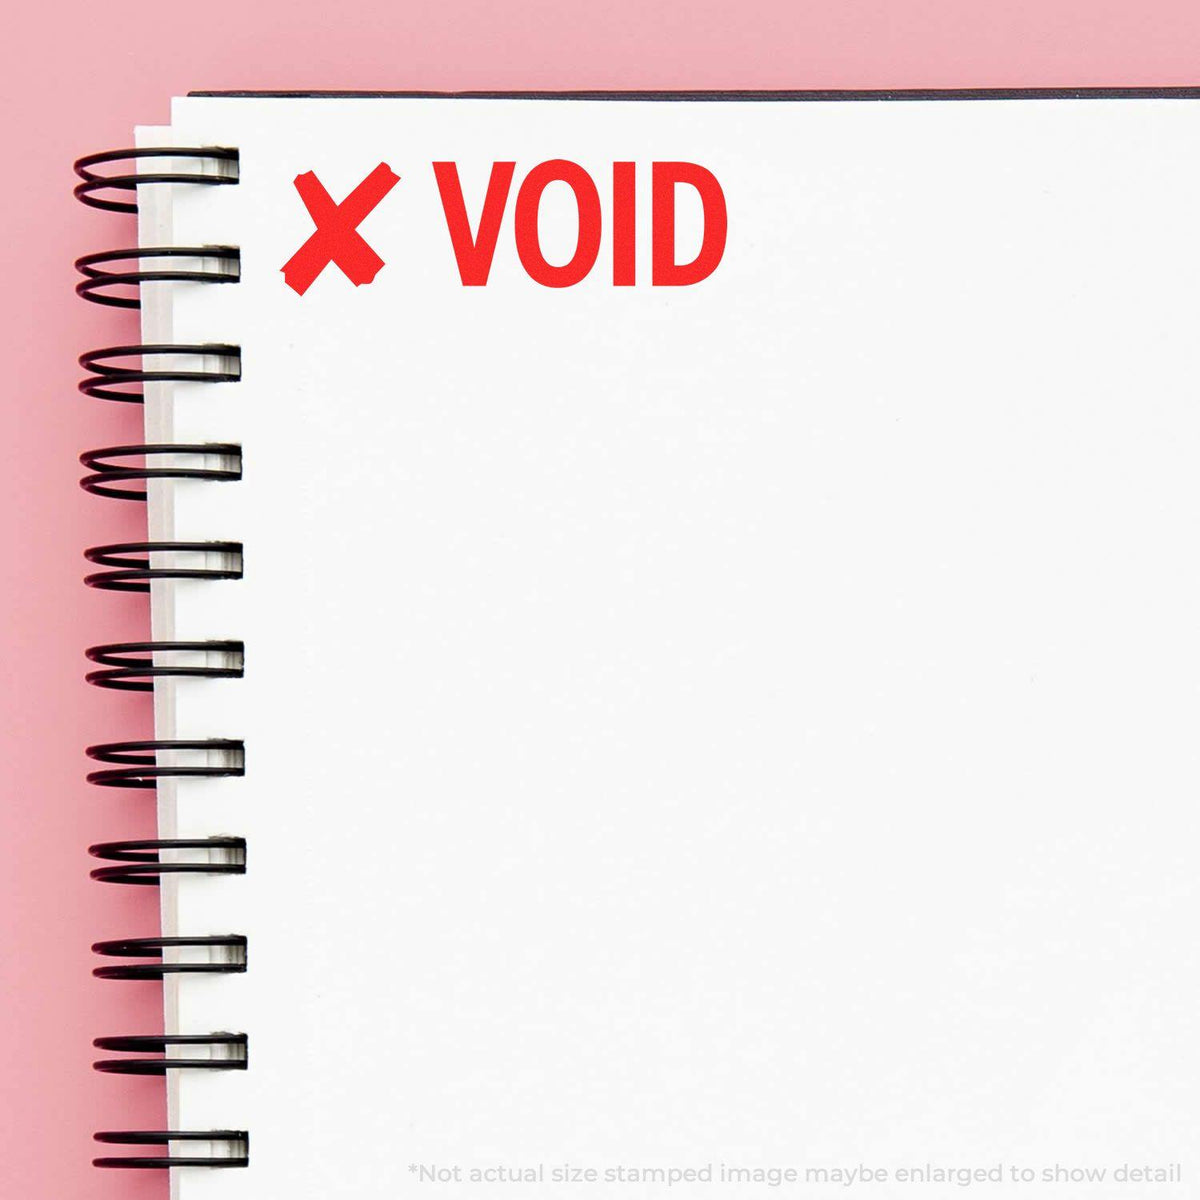 In Use Void with X Rubber Stamp Image